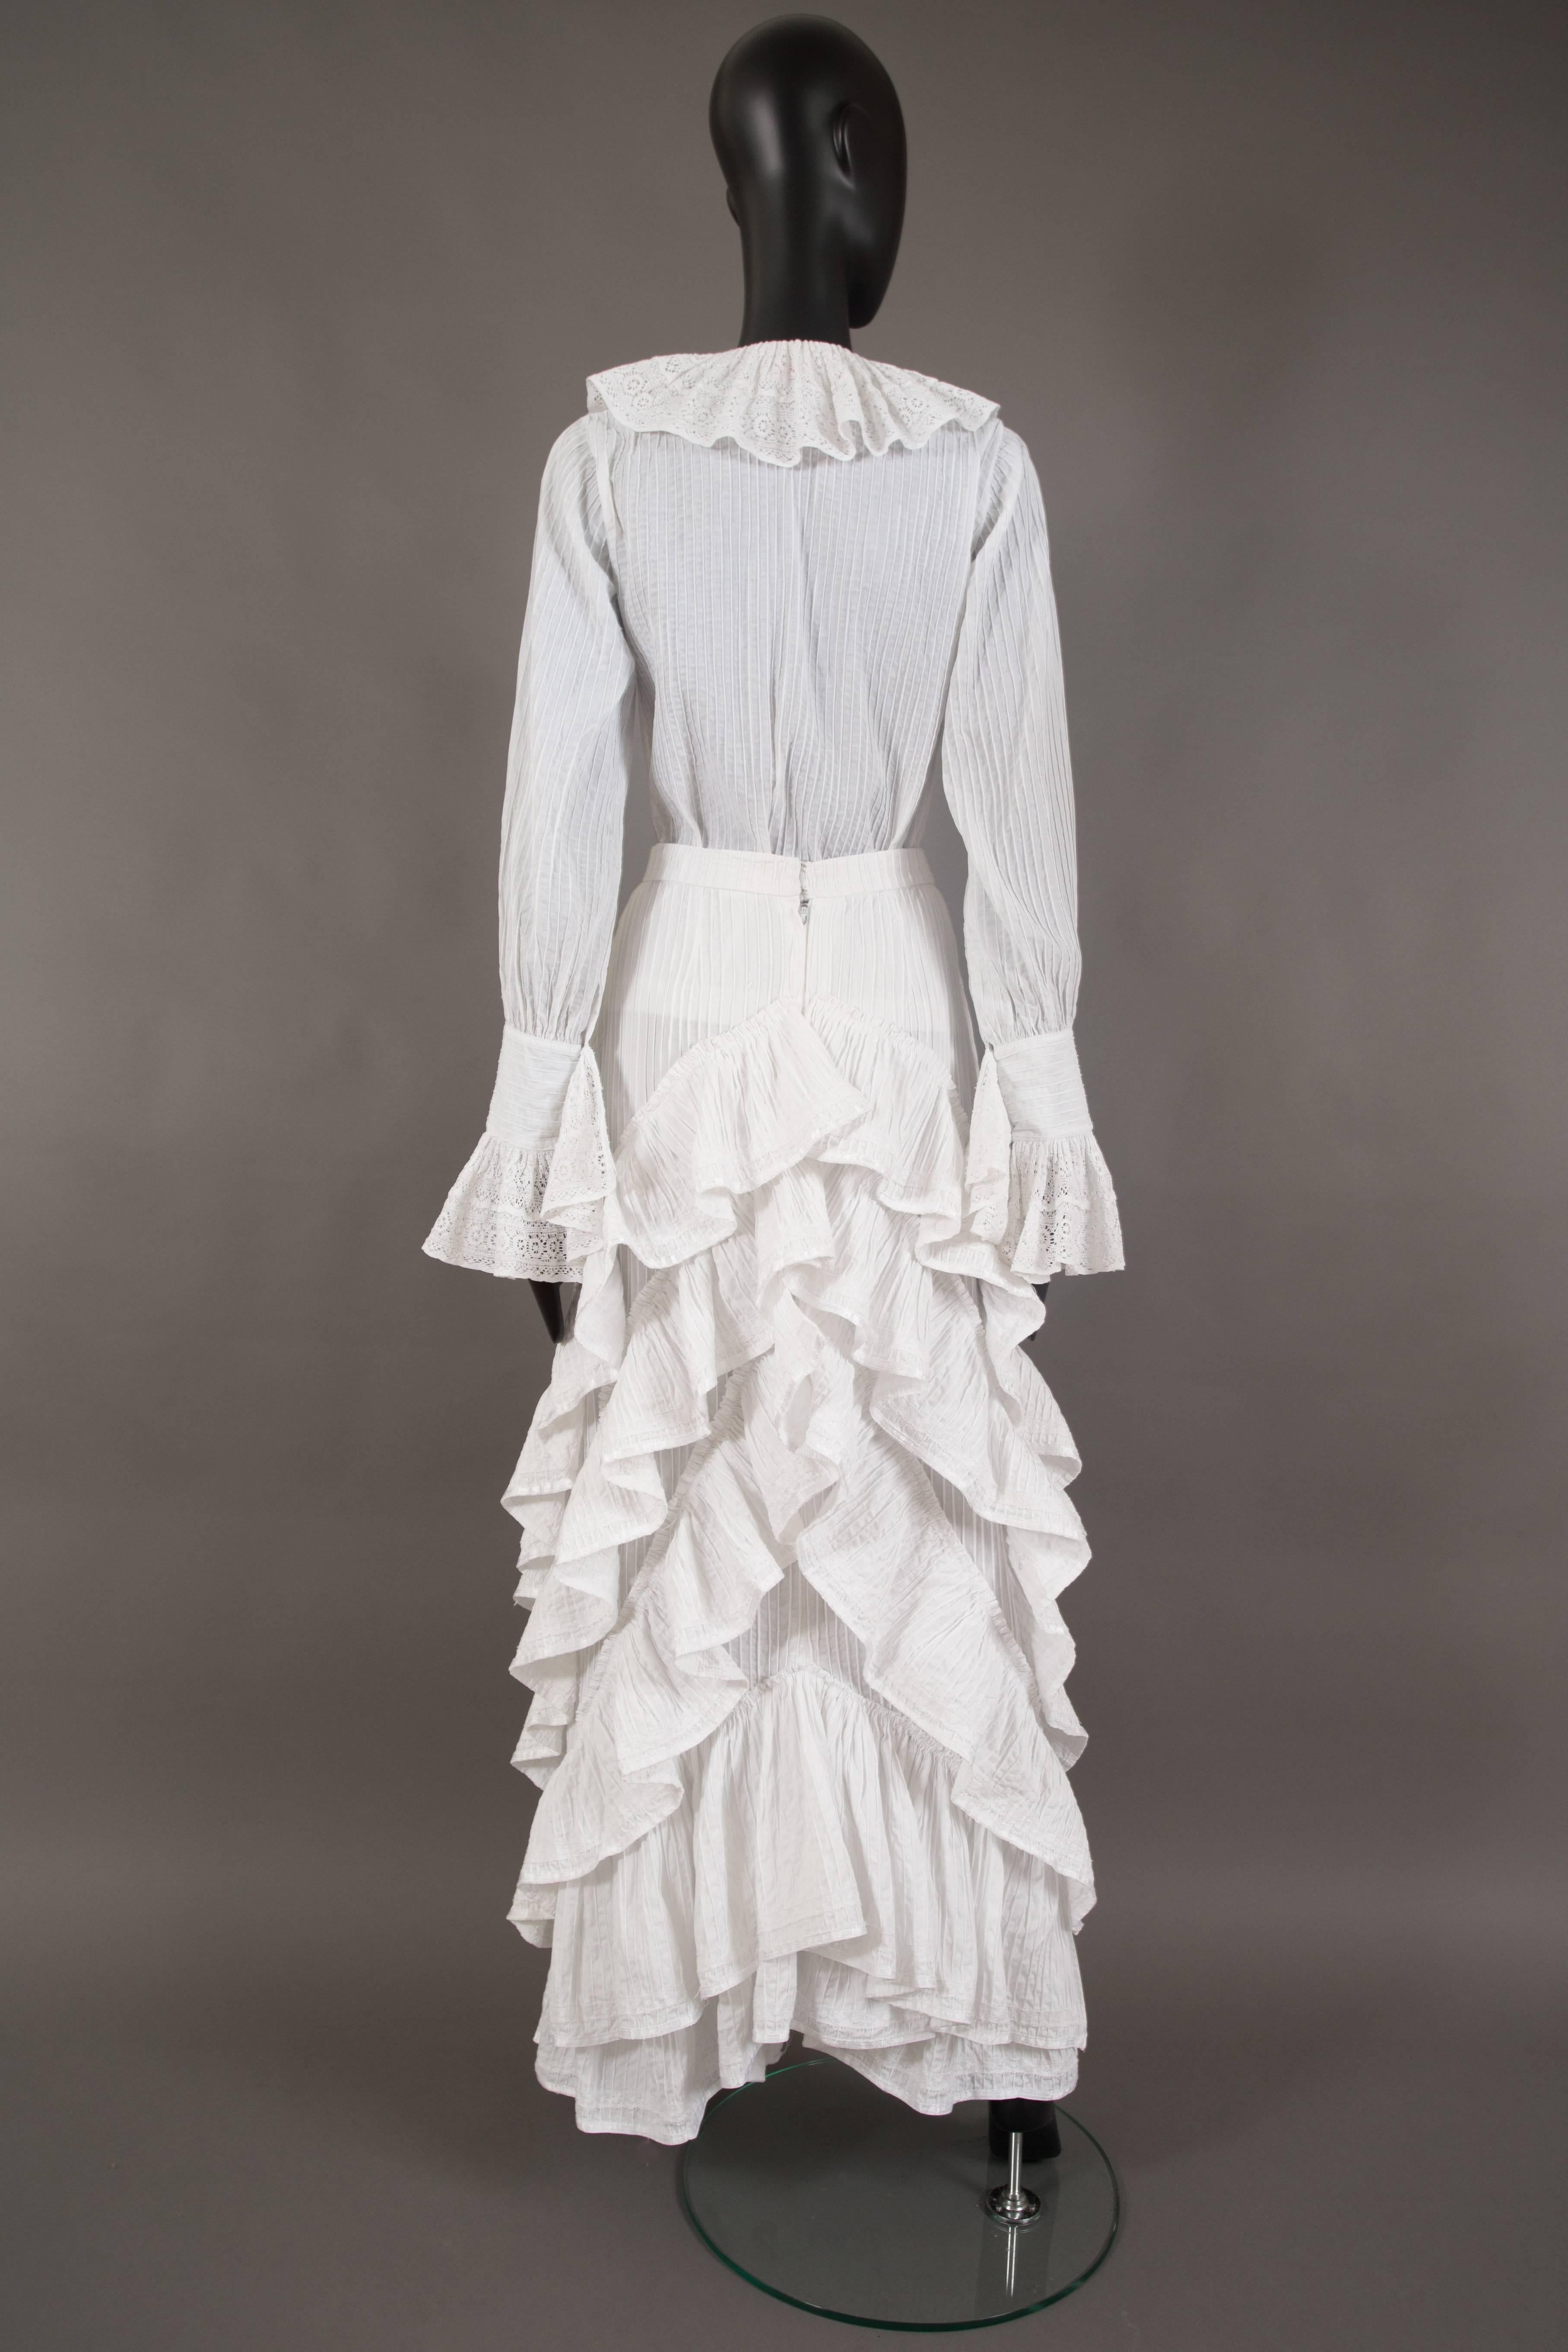 A rare Mexicana white pintucked cotton skirt suit, circa 1960. 

Bishop sleeved blouse with lace cotton frills on cuff and collar. High waisted full skirt with ruffled back and metal zip closure at rear. 

Mexicana was a London boutique on Lower